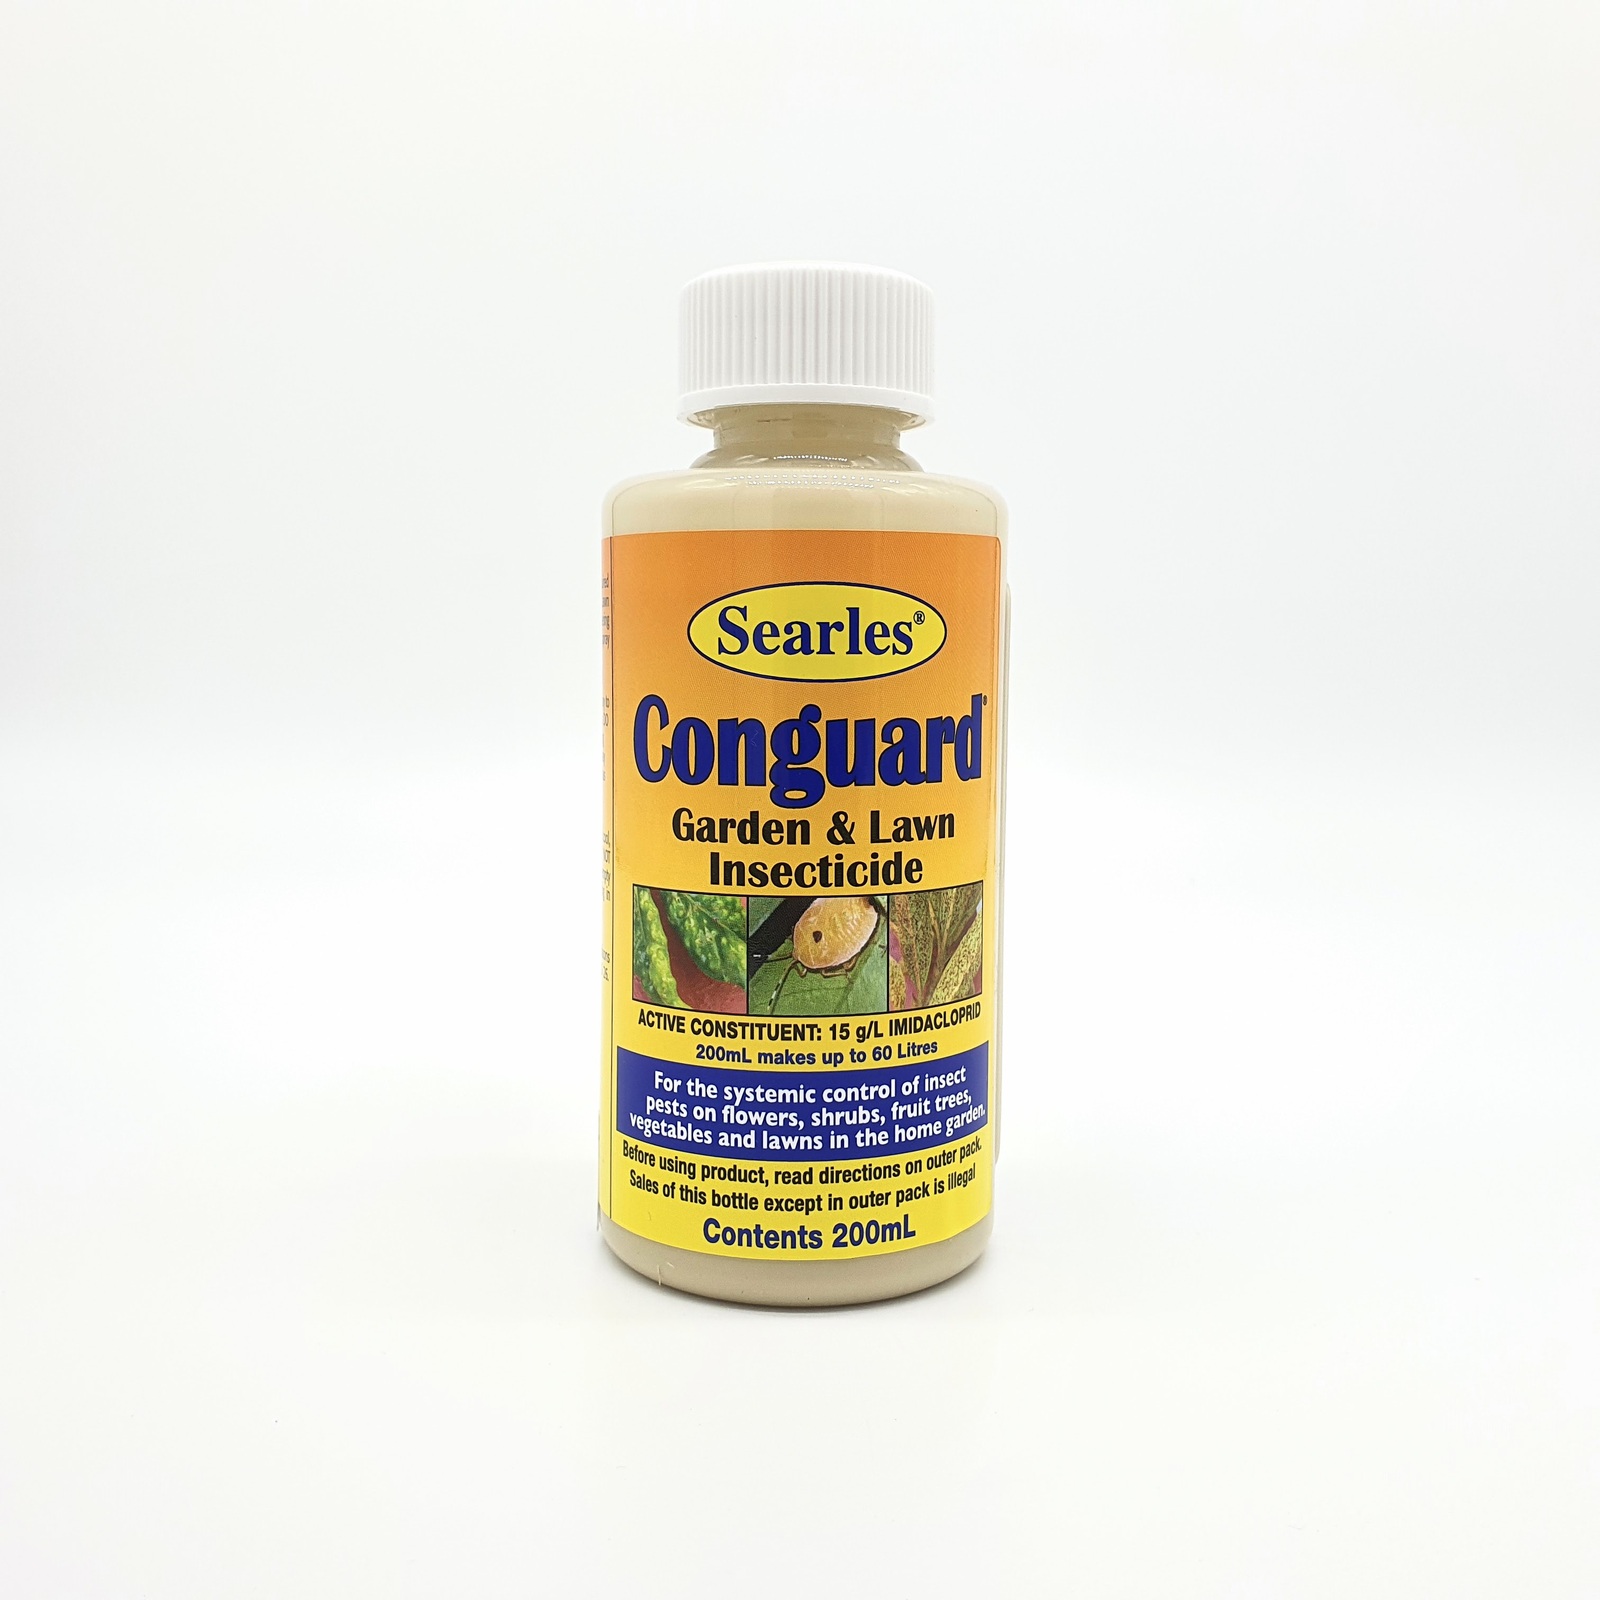 Searles Conguard Insecticide Garden and Lawn Concentrate 200ml